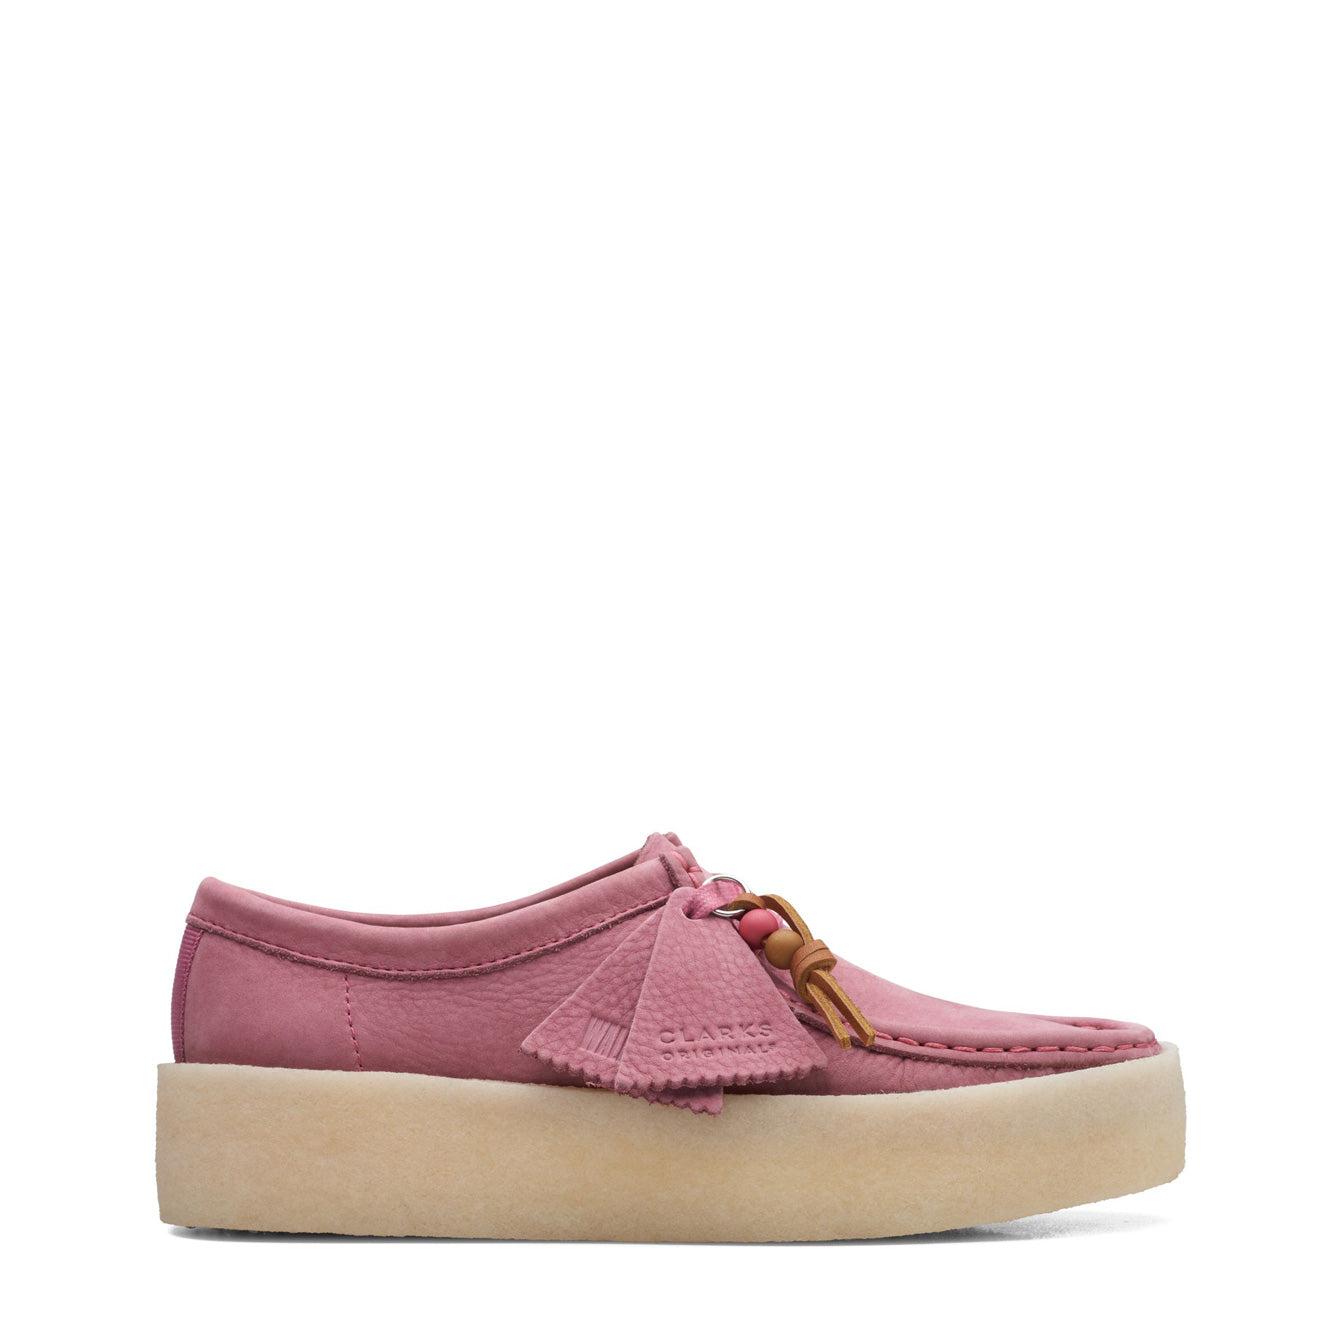 Clarks Wallabee Cup Shoes Nubuck in Pink | Lyst